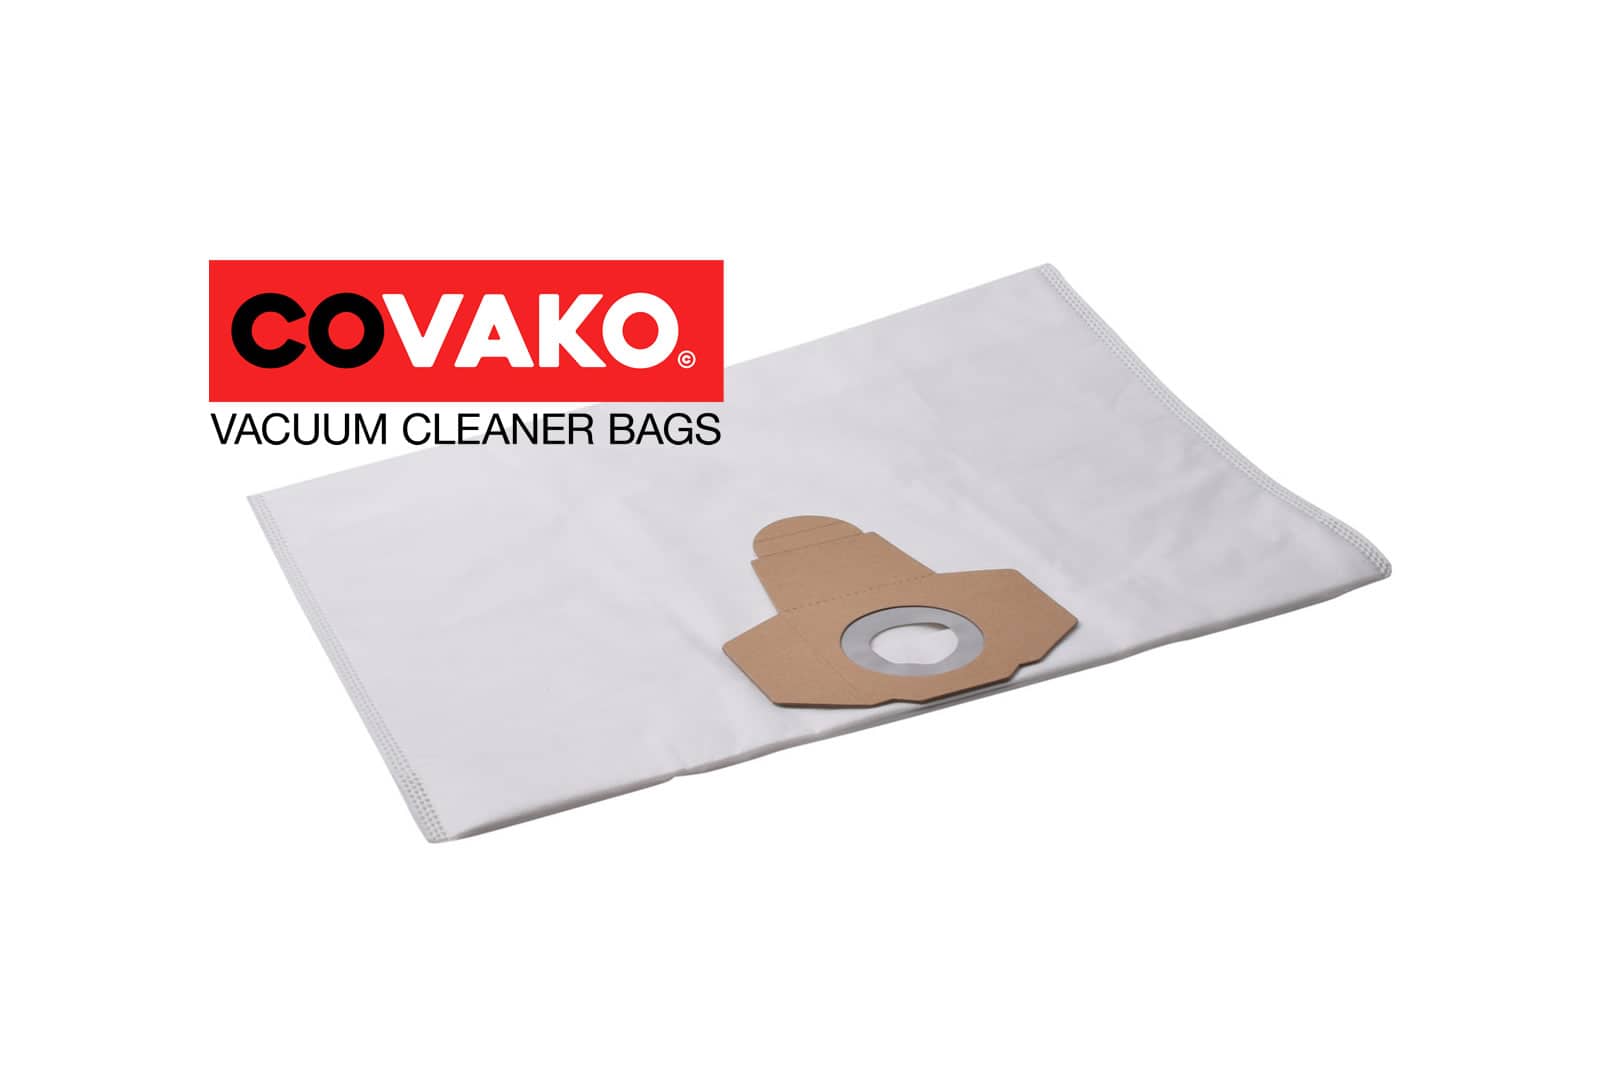 Einhell TC-VC 1820 S / Synthesis - Einhell vacuum cleaner bags